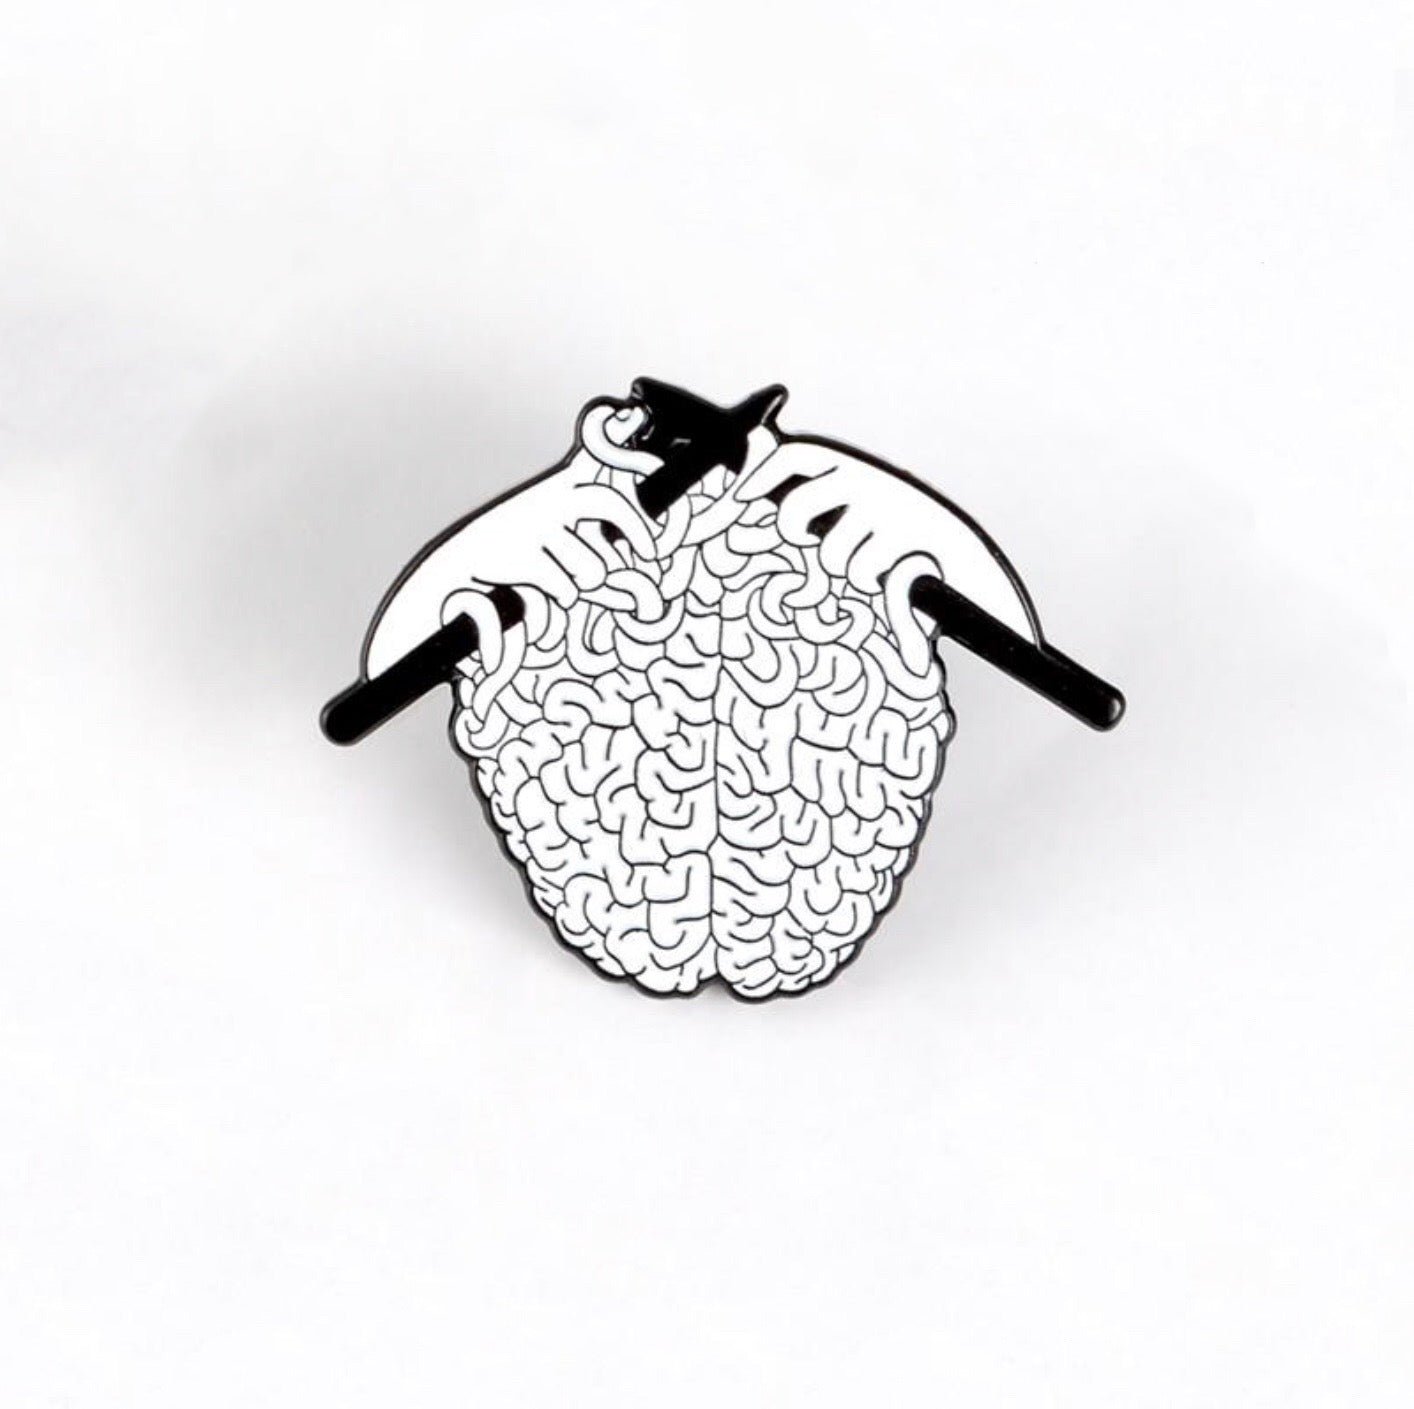 Knit Sweater Brain Pin - Psych Outlet